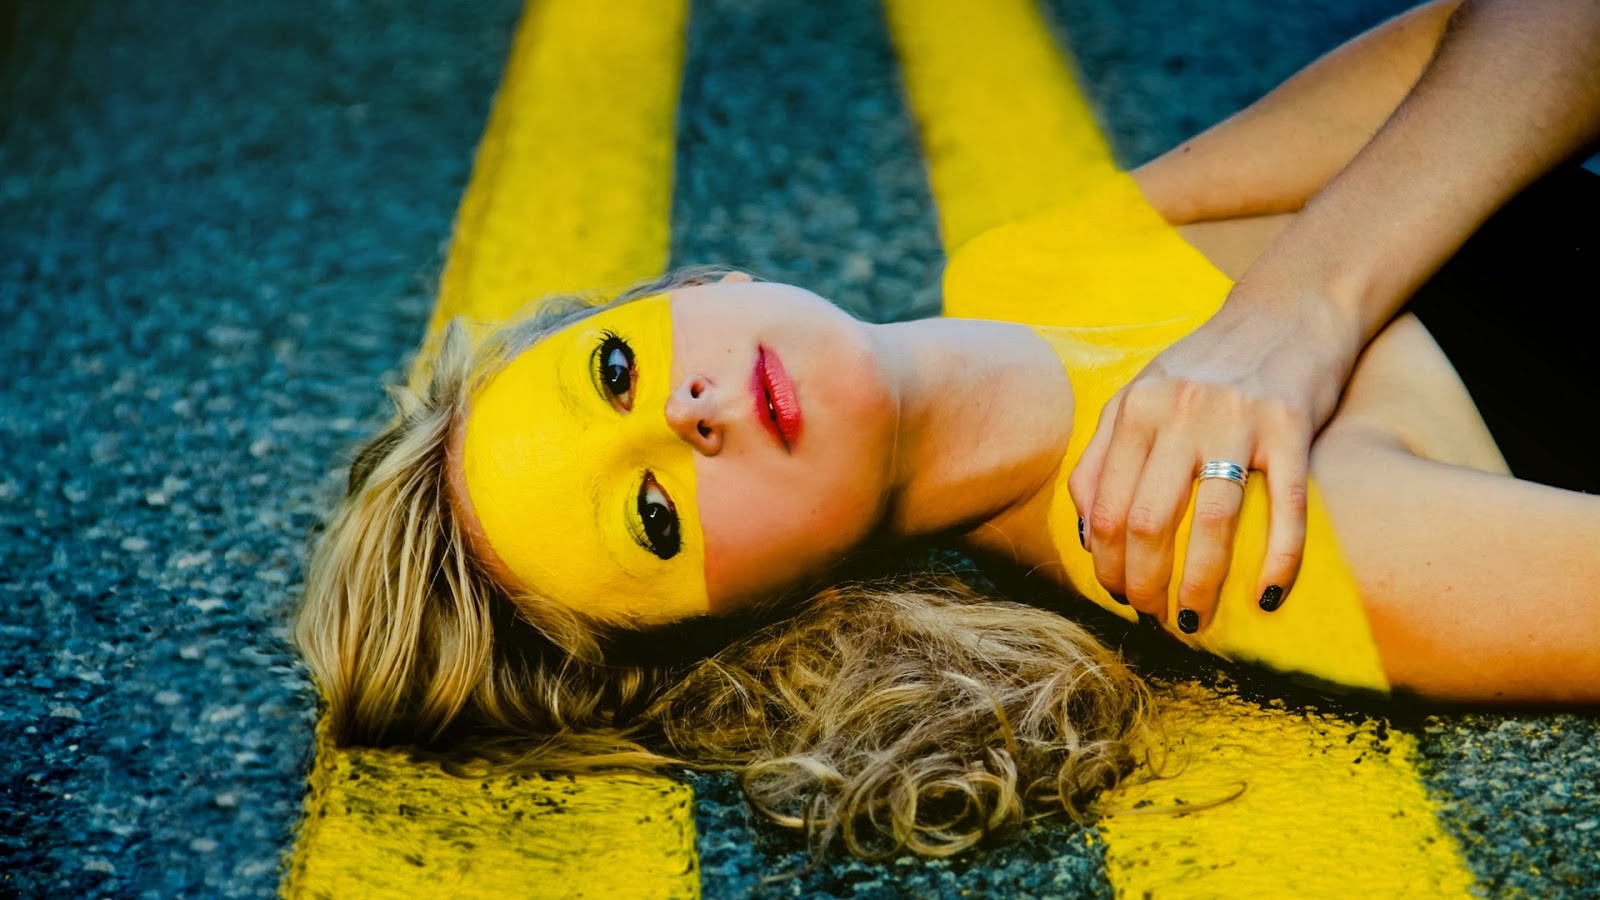 Women Yellow Face Paint Body Paint Red Lipstick Blonde Model Painted Nails Humor Asphalt 1600x900